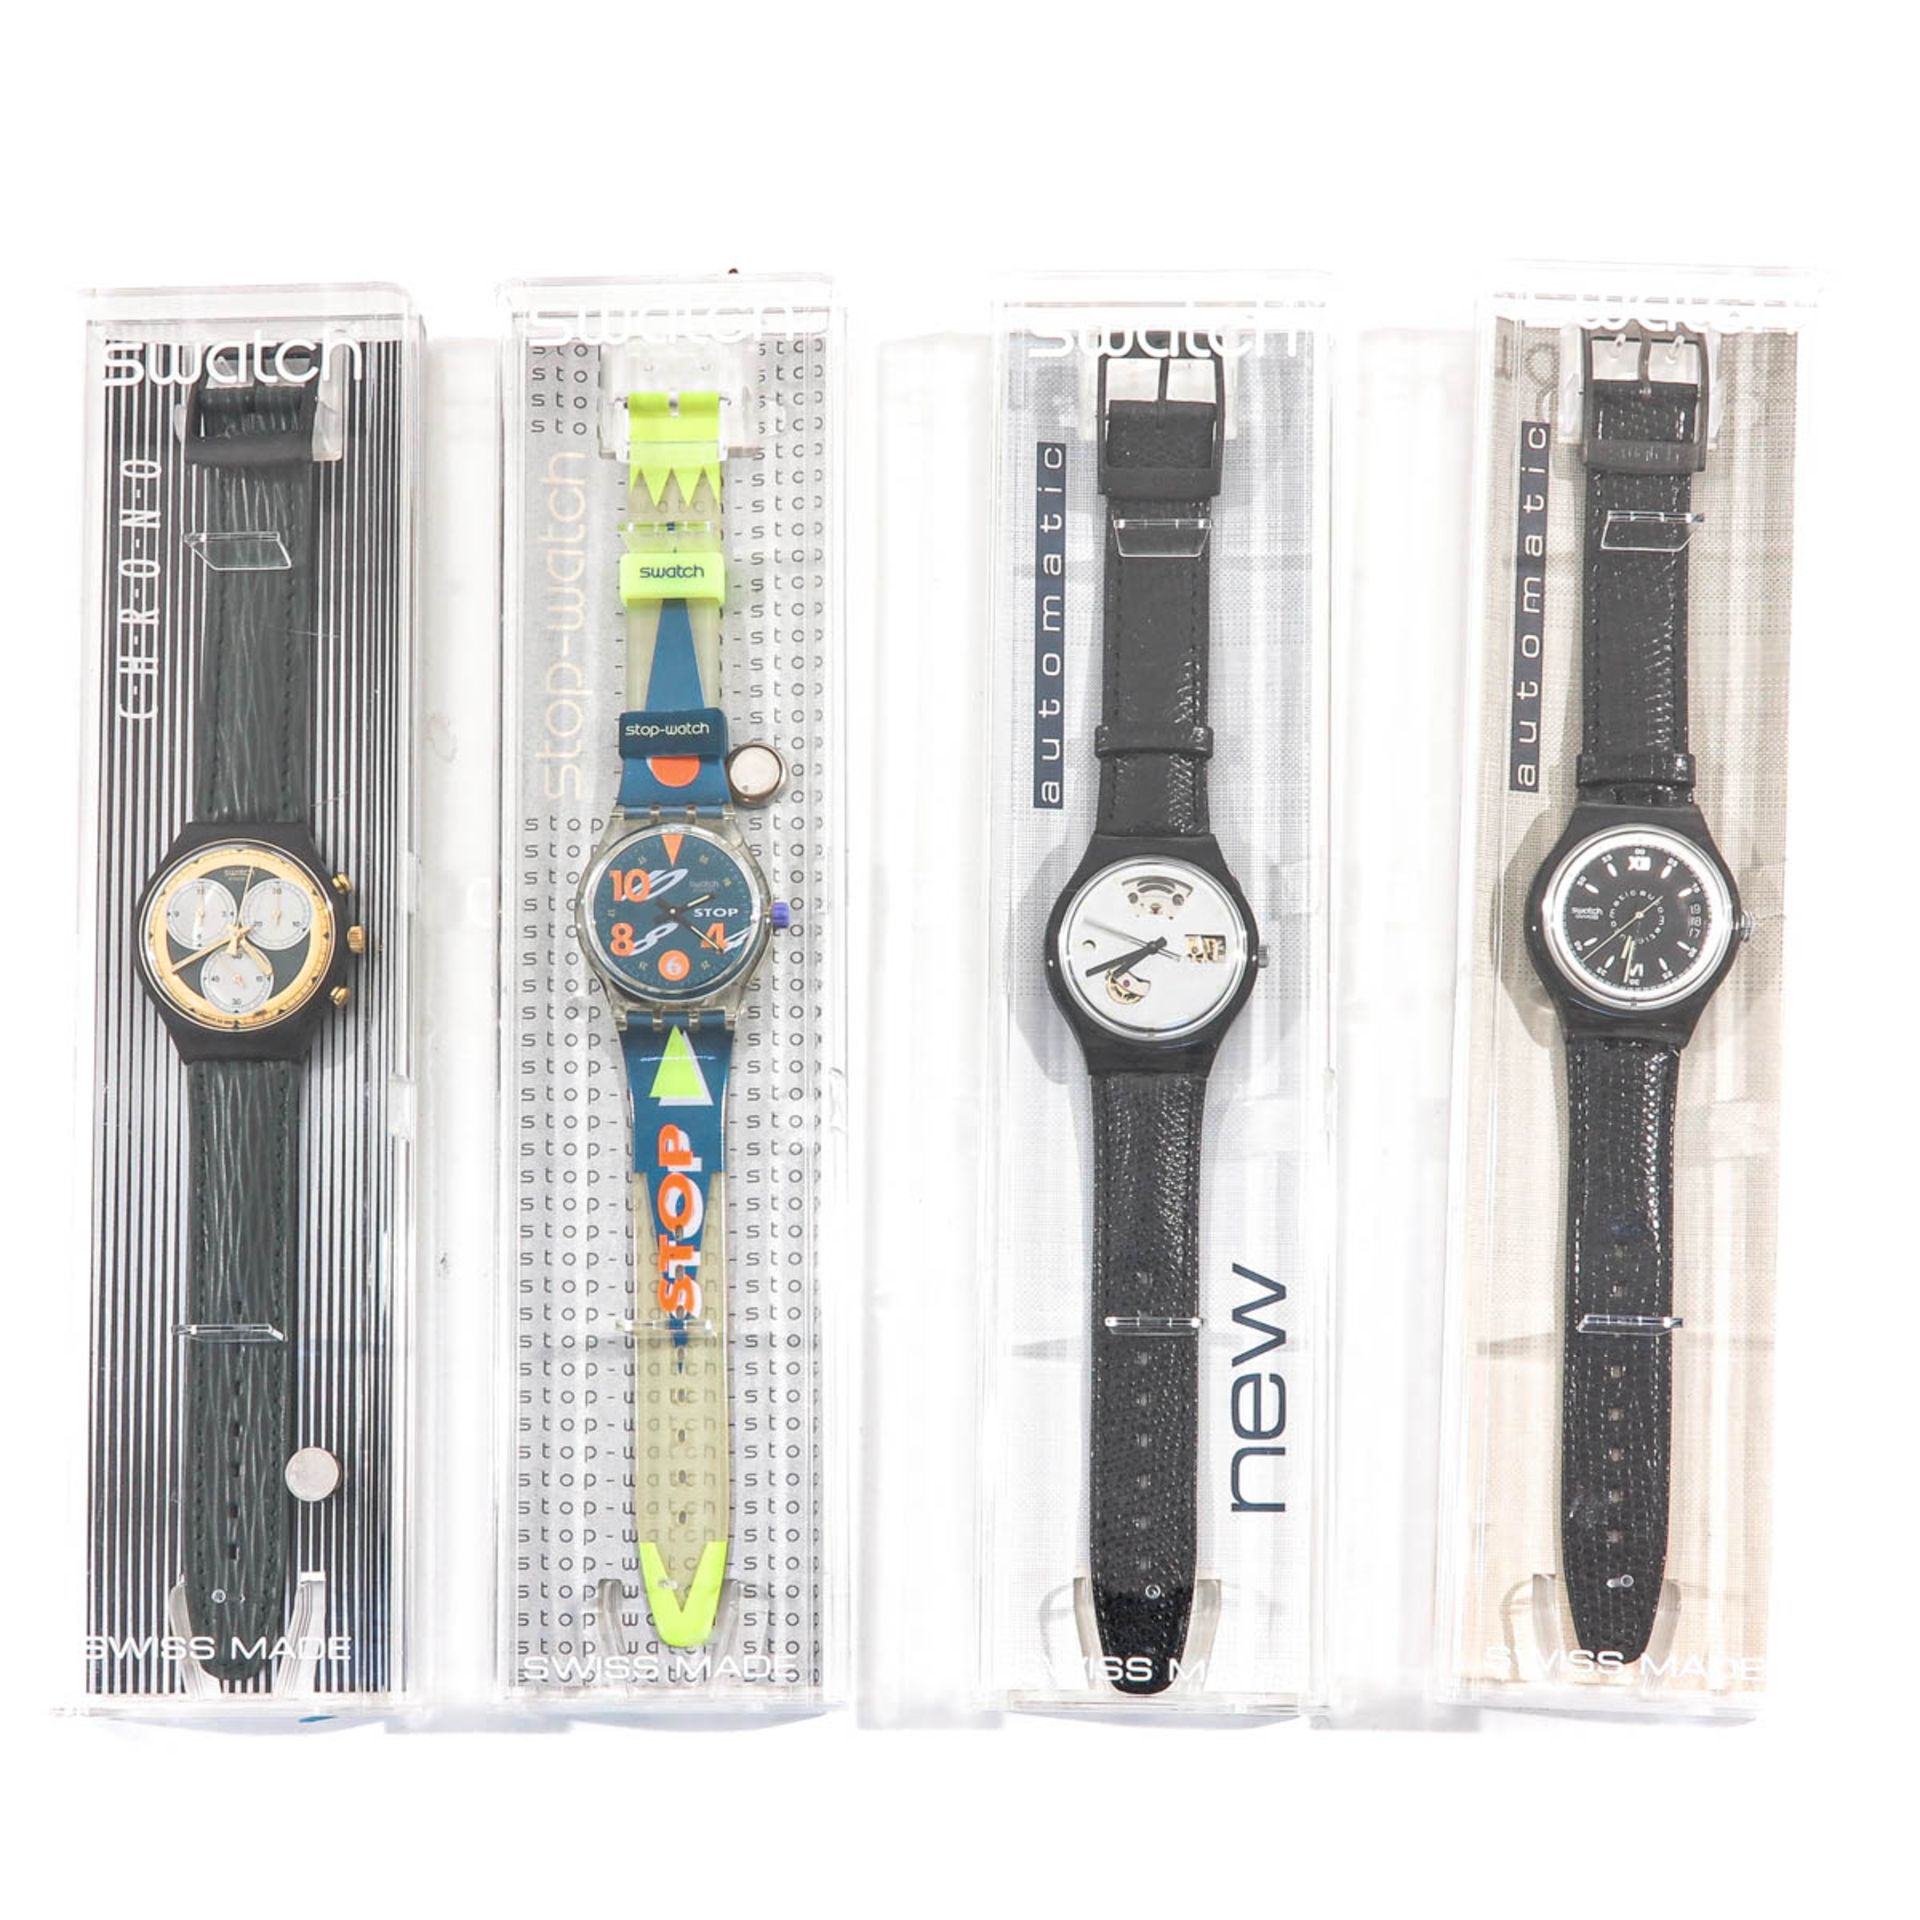 A Collection of 10 Swatch Watches - Image 3 of 9